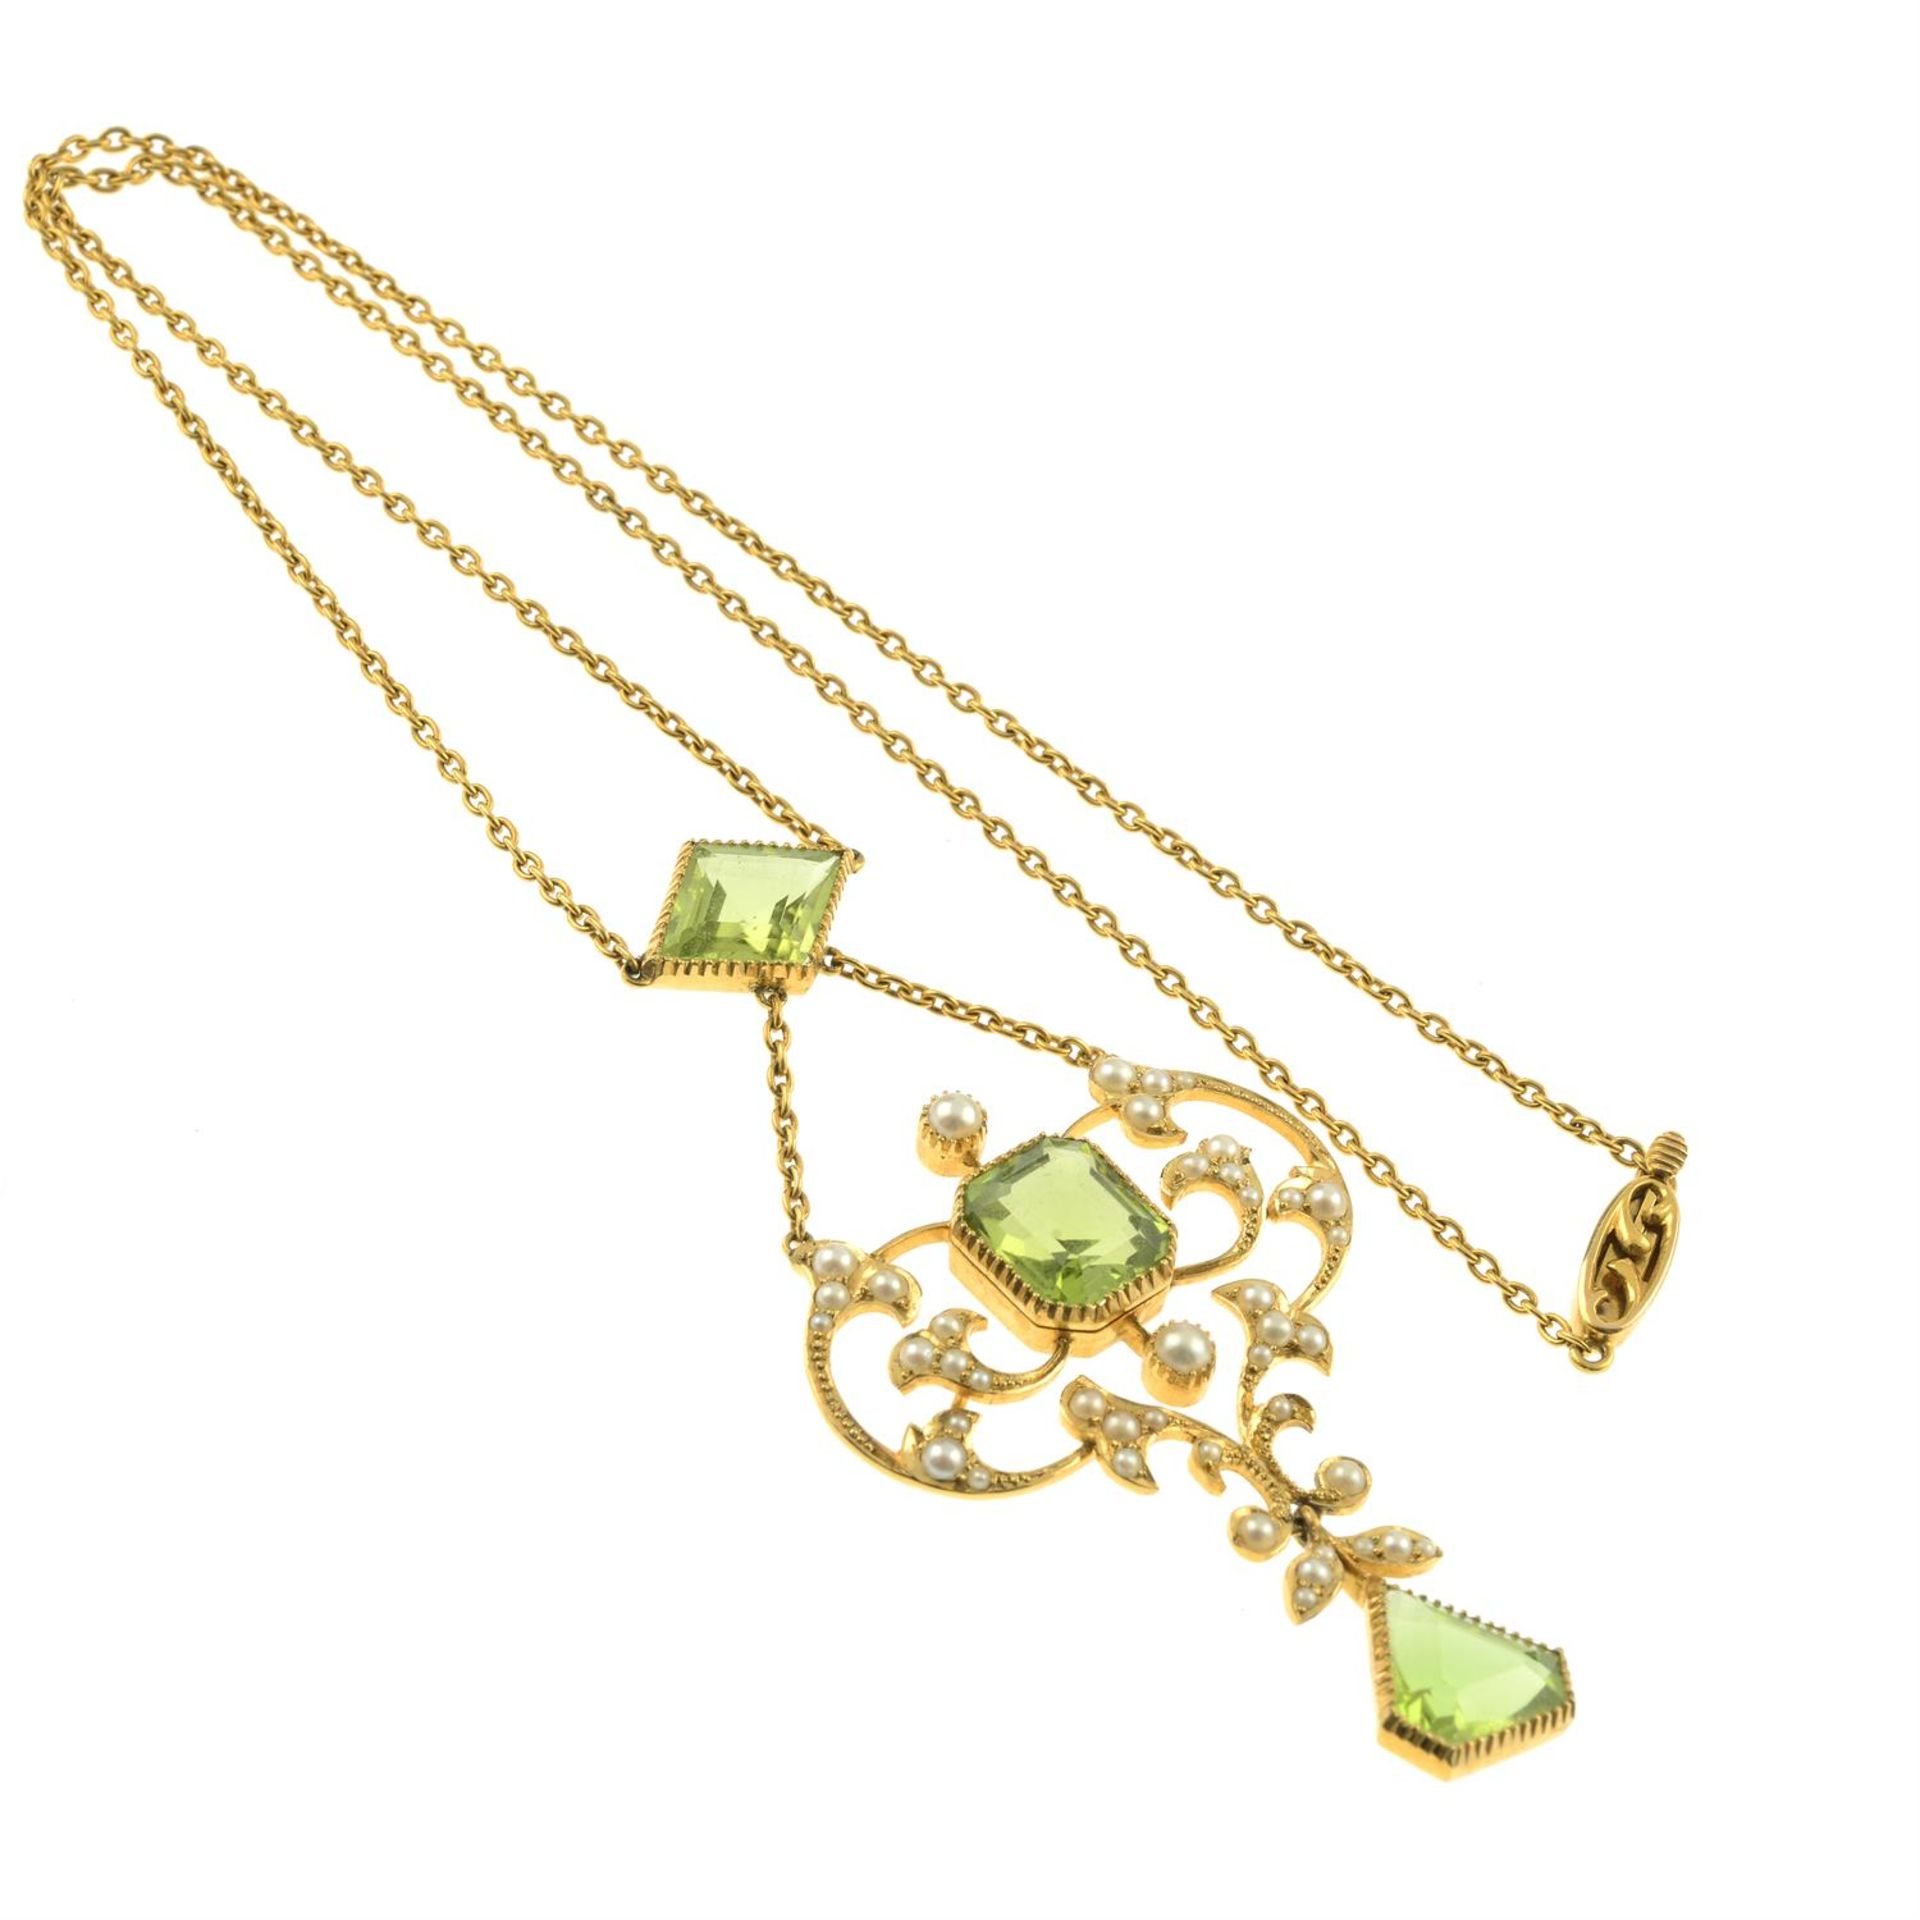 An Edwardian 15ct gold peridot and split pearl pendant necklace, with fitted case. - Image 4 of 6